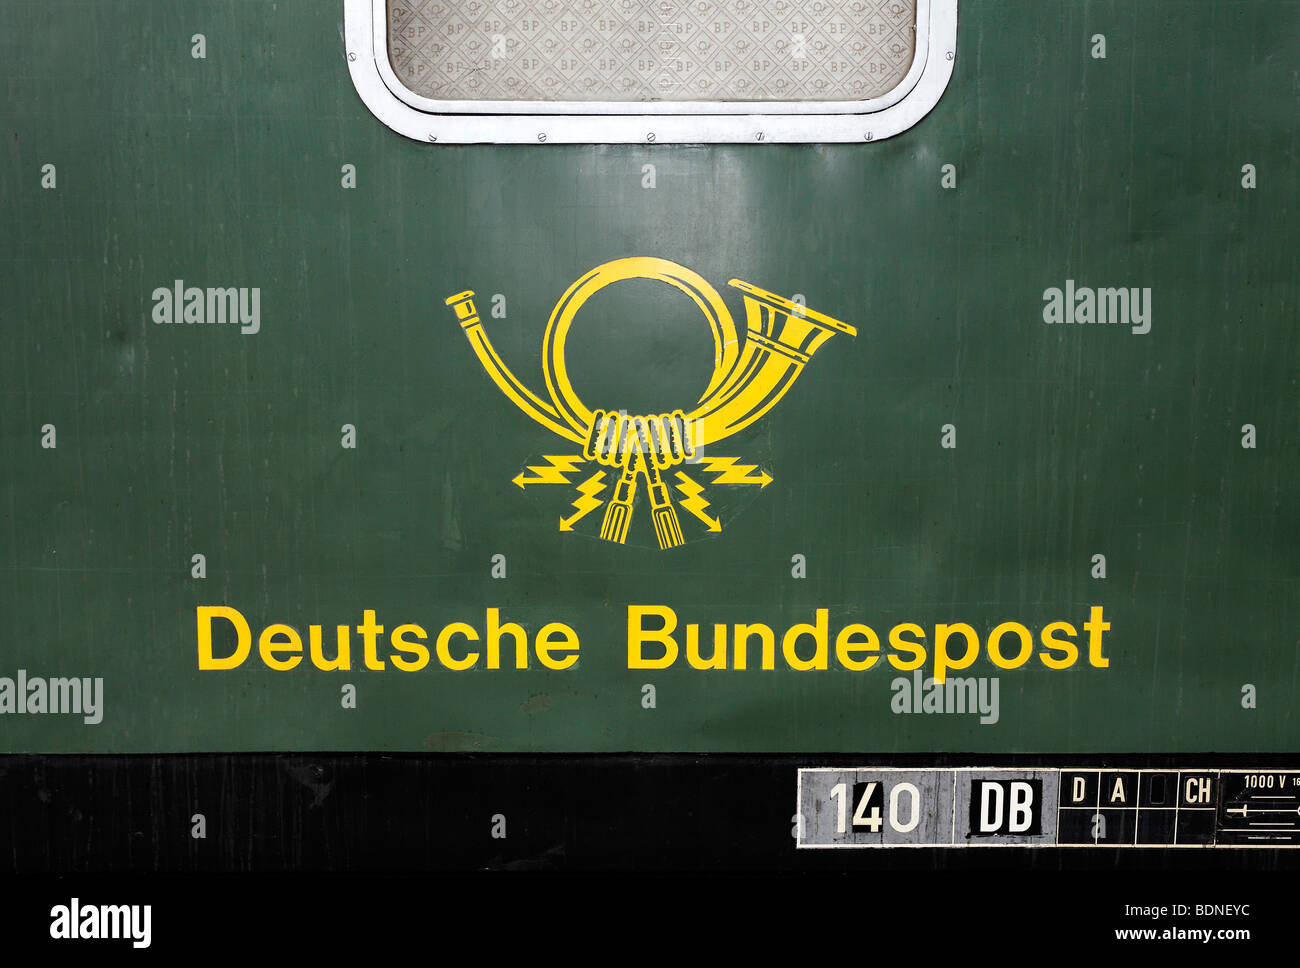 Historic wagon of the German Federal Mail with old post horn logo, circa 1960, Germany Stock Photo